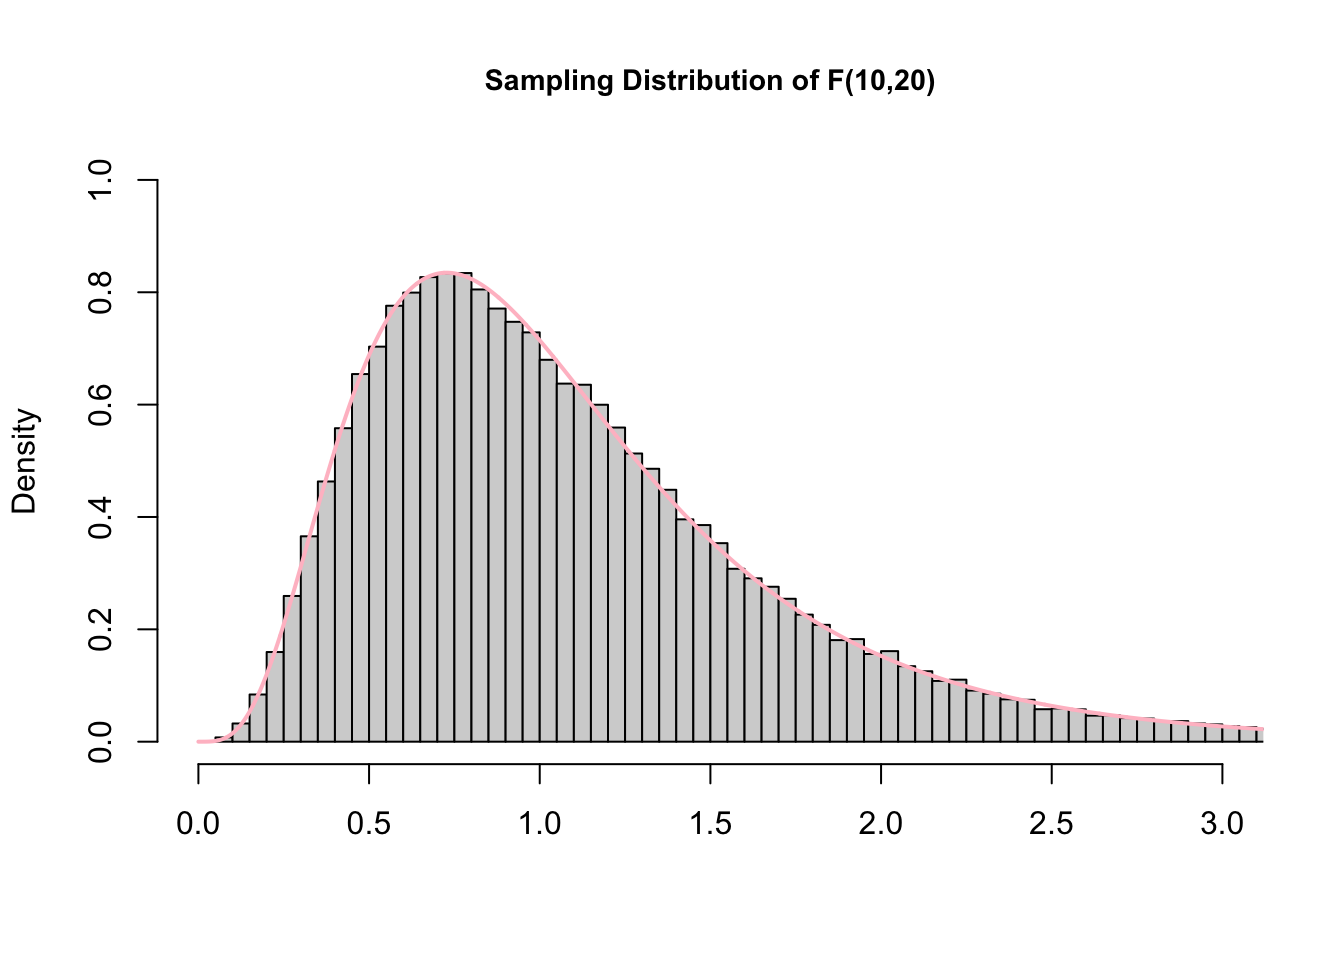 Graph of the sampling distribution of F used under Creative Commons License from Hartmann, K., Krois, J., Waske, B. (2018): E-Learning Project SOGA: Statistics and Geospatial Data Analysis. Department of Earth Sciences, Freie Universitaet Berlin.